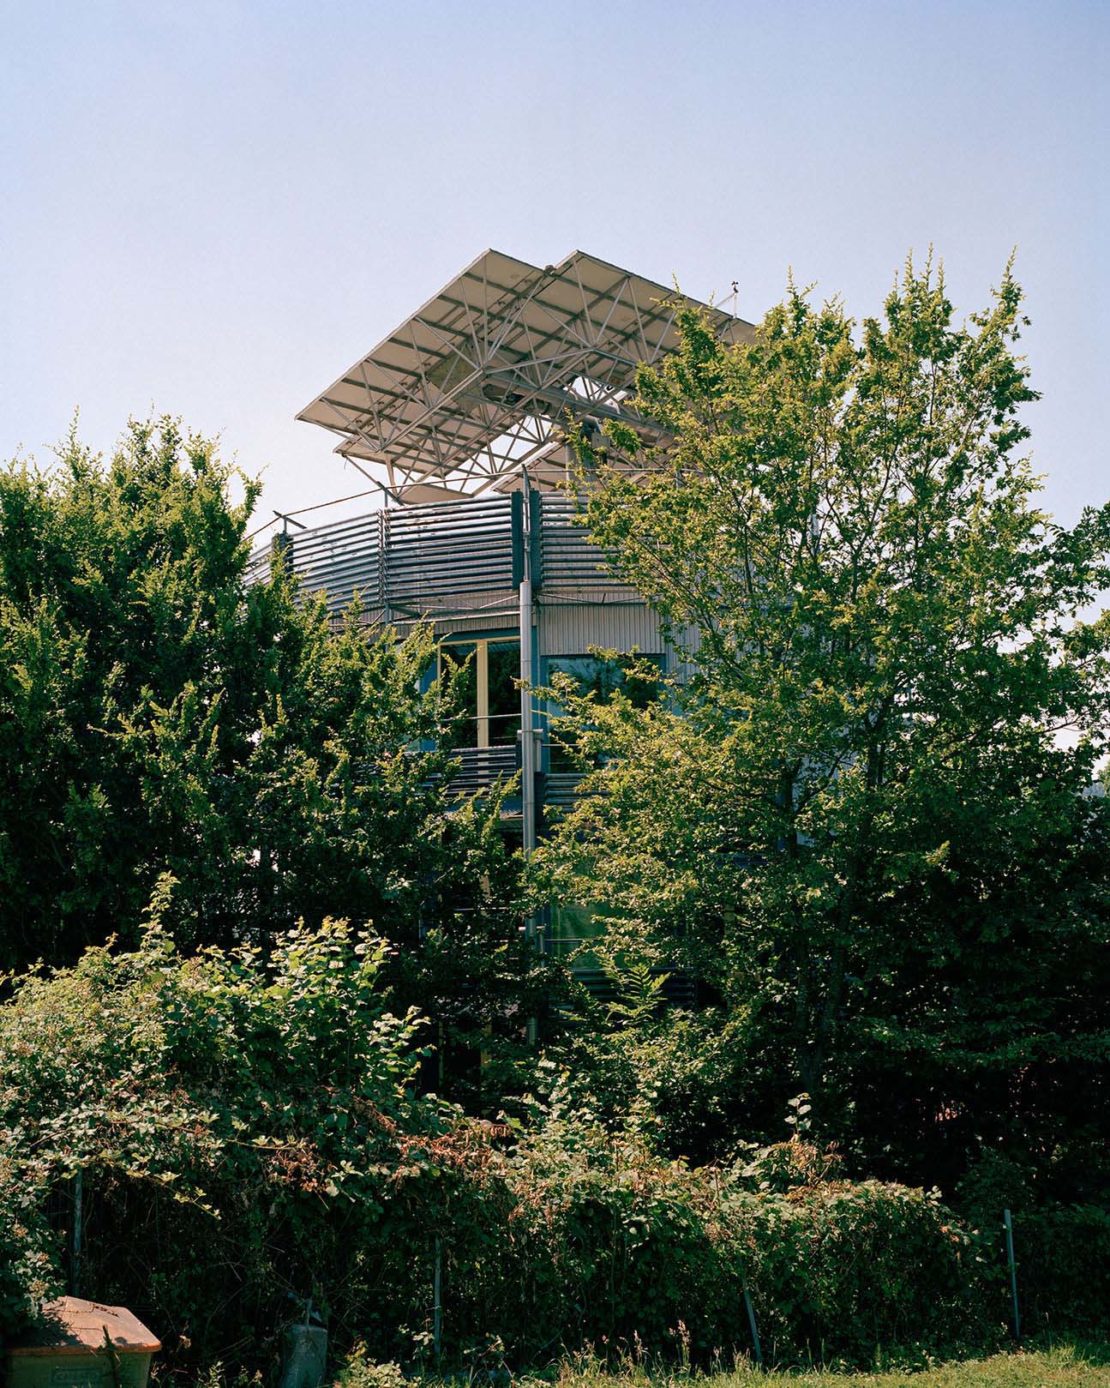 An experimental house, with roof solar panels and a spinning mechanism to follow sunlight, built by resident Rolf Disch in 1994